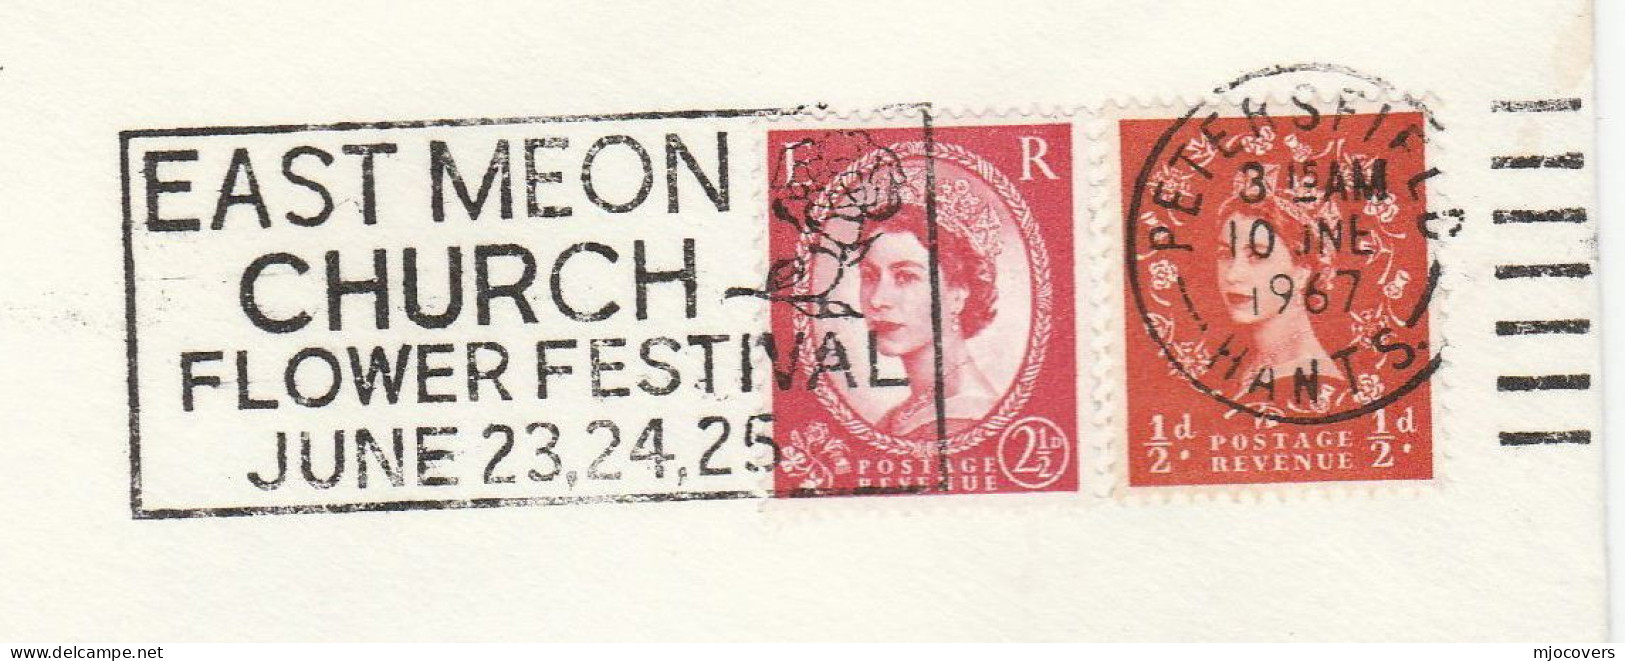 EAST MEON CHURCH Fkiwer FESTIVAL  Cover 1967 Petersfield SLOGAN Gb Stamps Religion - Covers & Documents